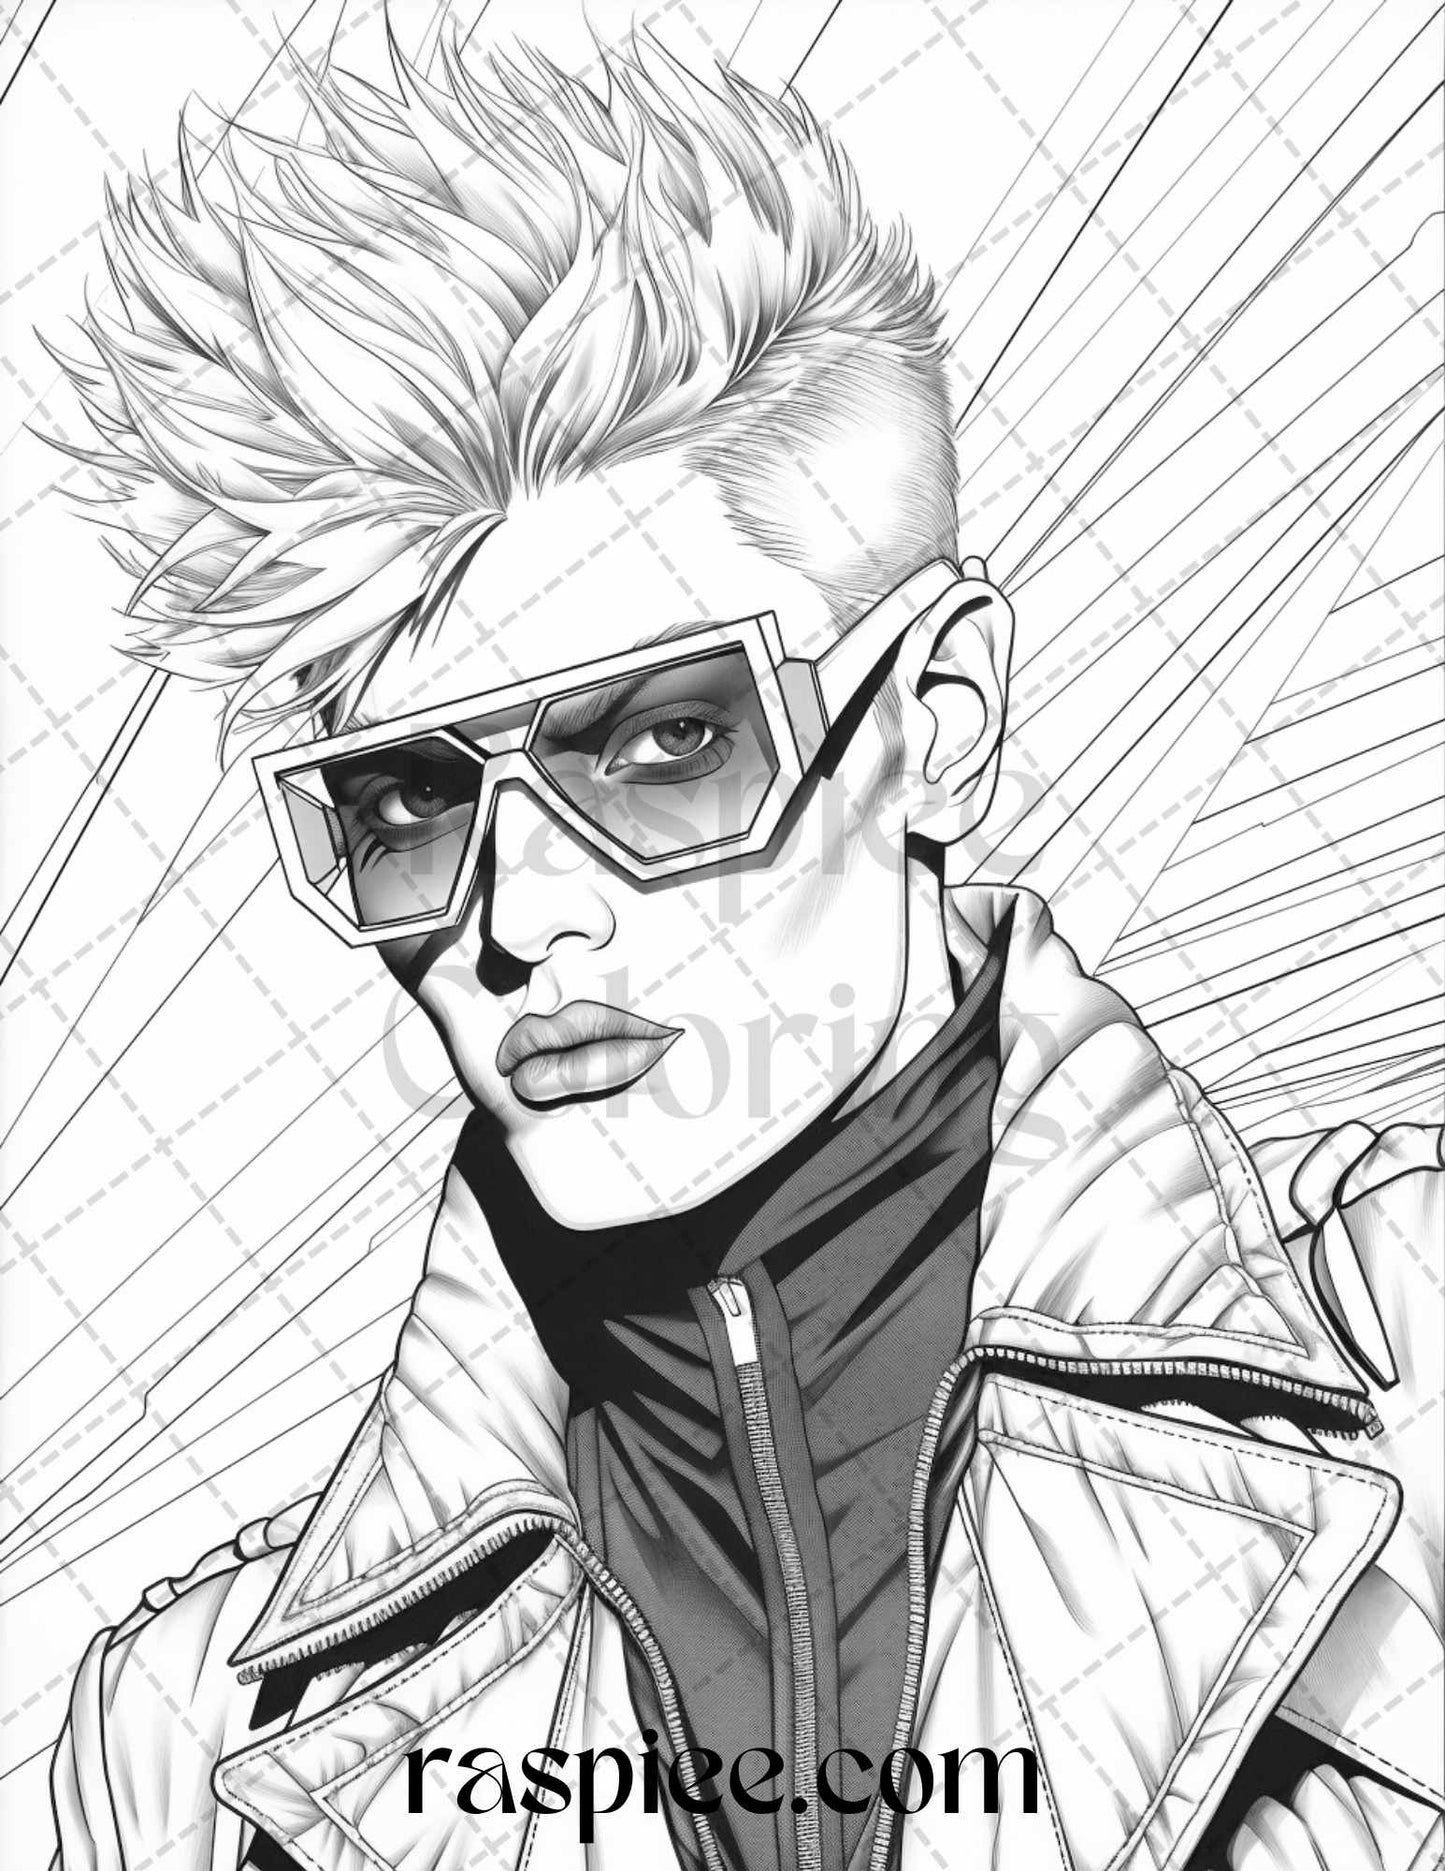 1980s New Wave Pop Star Coloring Page, Retro Coloring Pages for Adults, Adult Coloring Activity, Retro DIY Home Decor, Creative Coloring Sheet, Relaxation Therapy Art, Detailed Line Artwork, Nostalgic Coloring Pages, Portrait Coloring Pages for Adults, Portrait Grayscale Coloring Pages, Music Coloring Pages